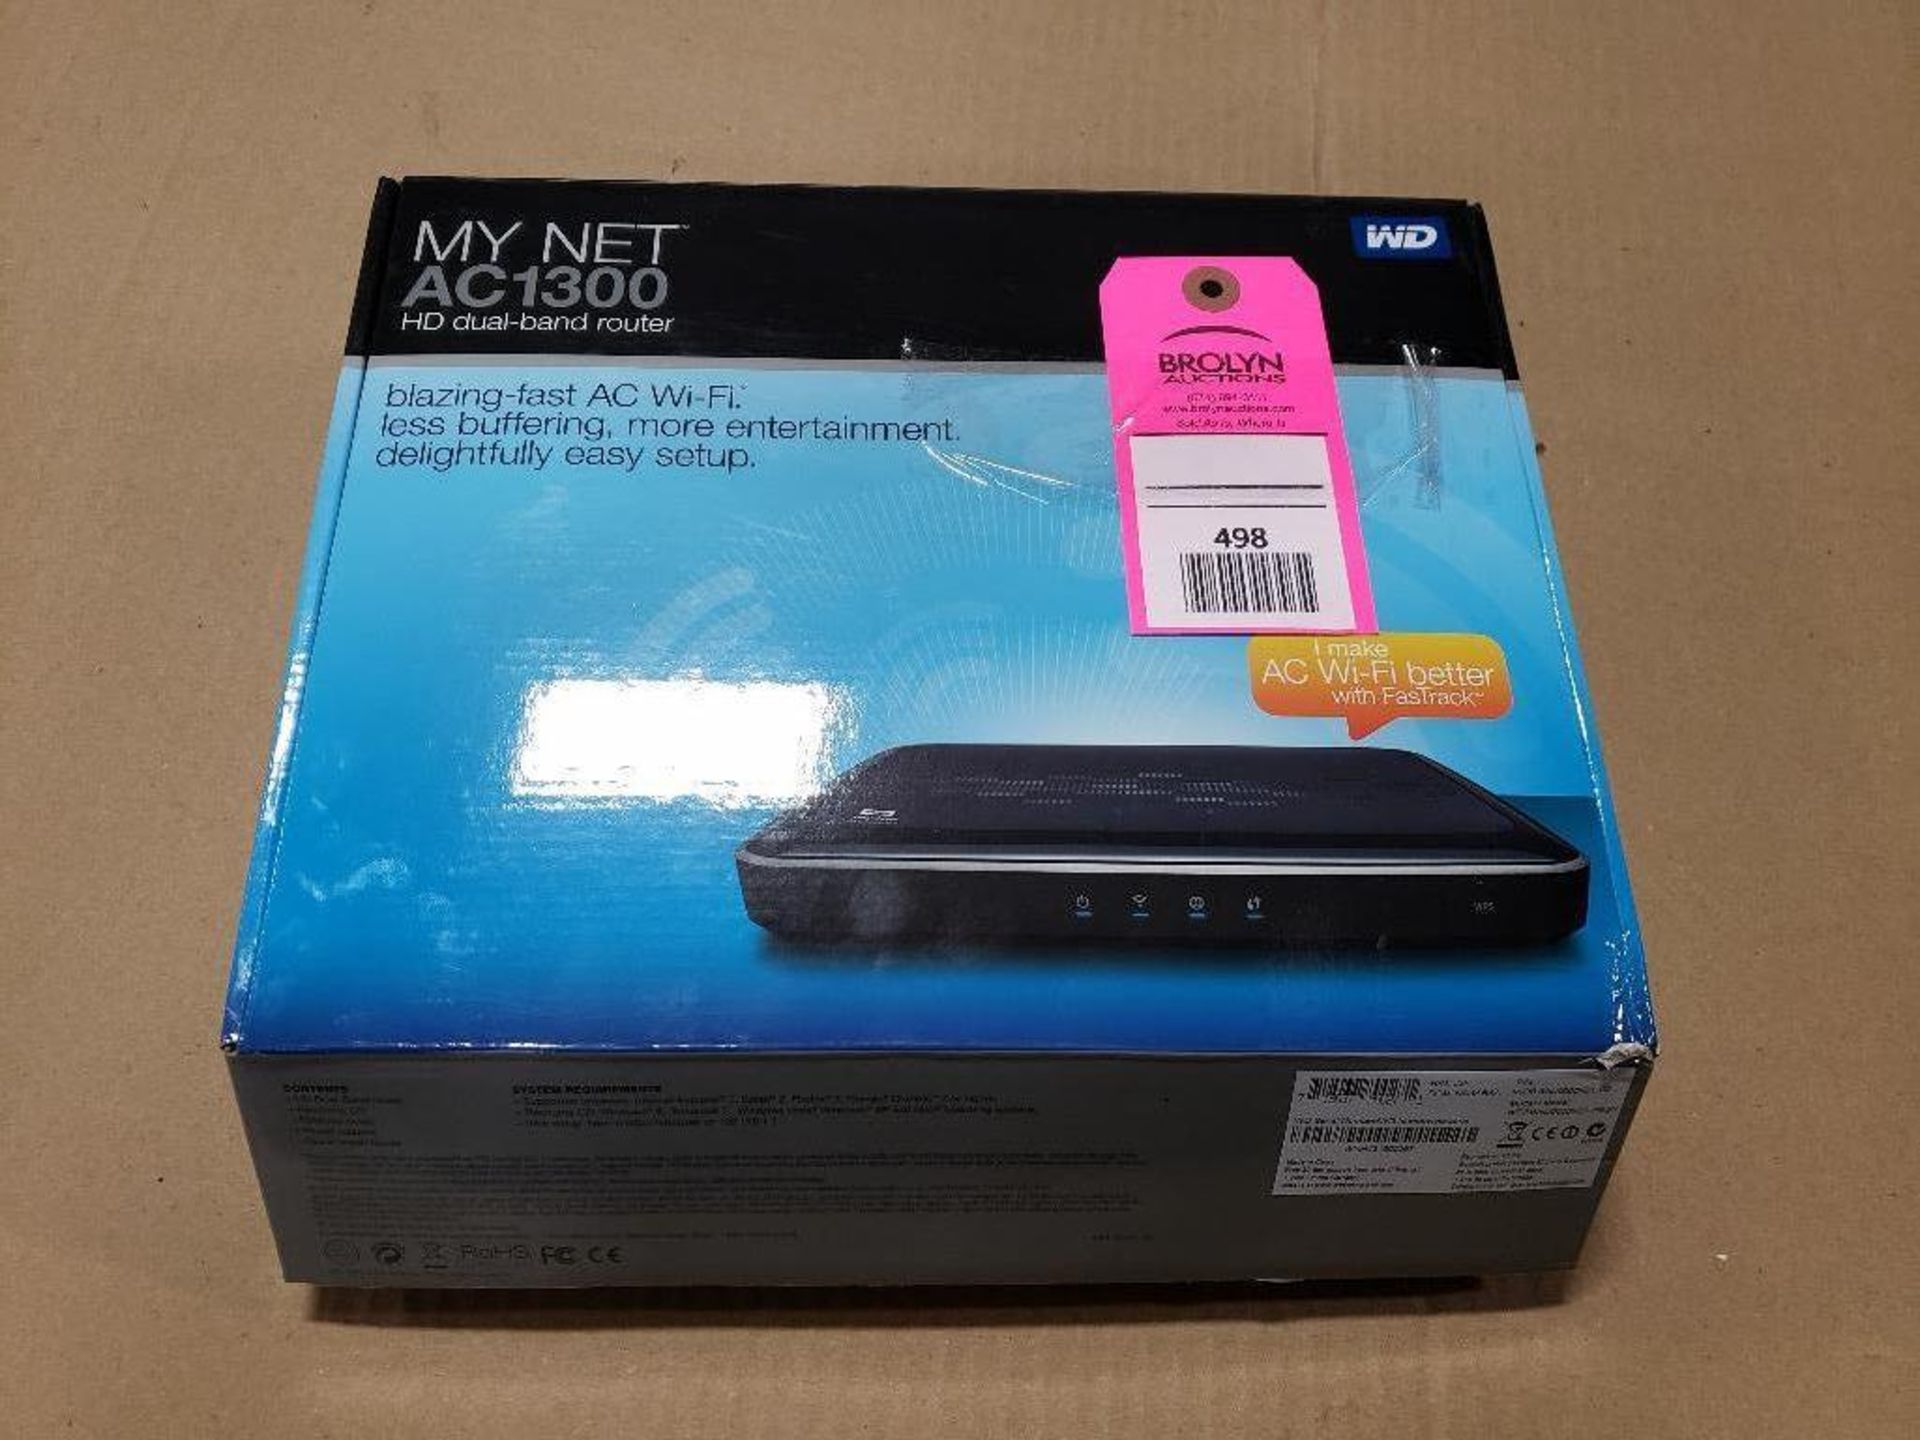 WD My Net AC1300 dual-band HD router. - Image 9 of 9